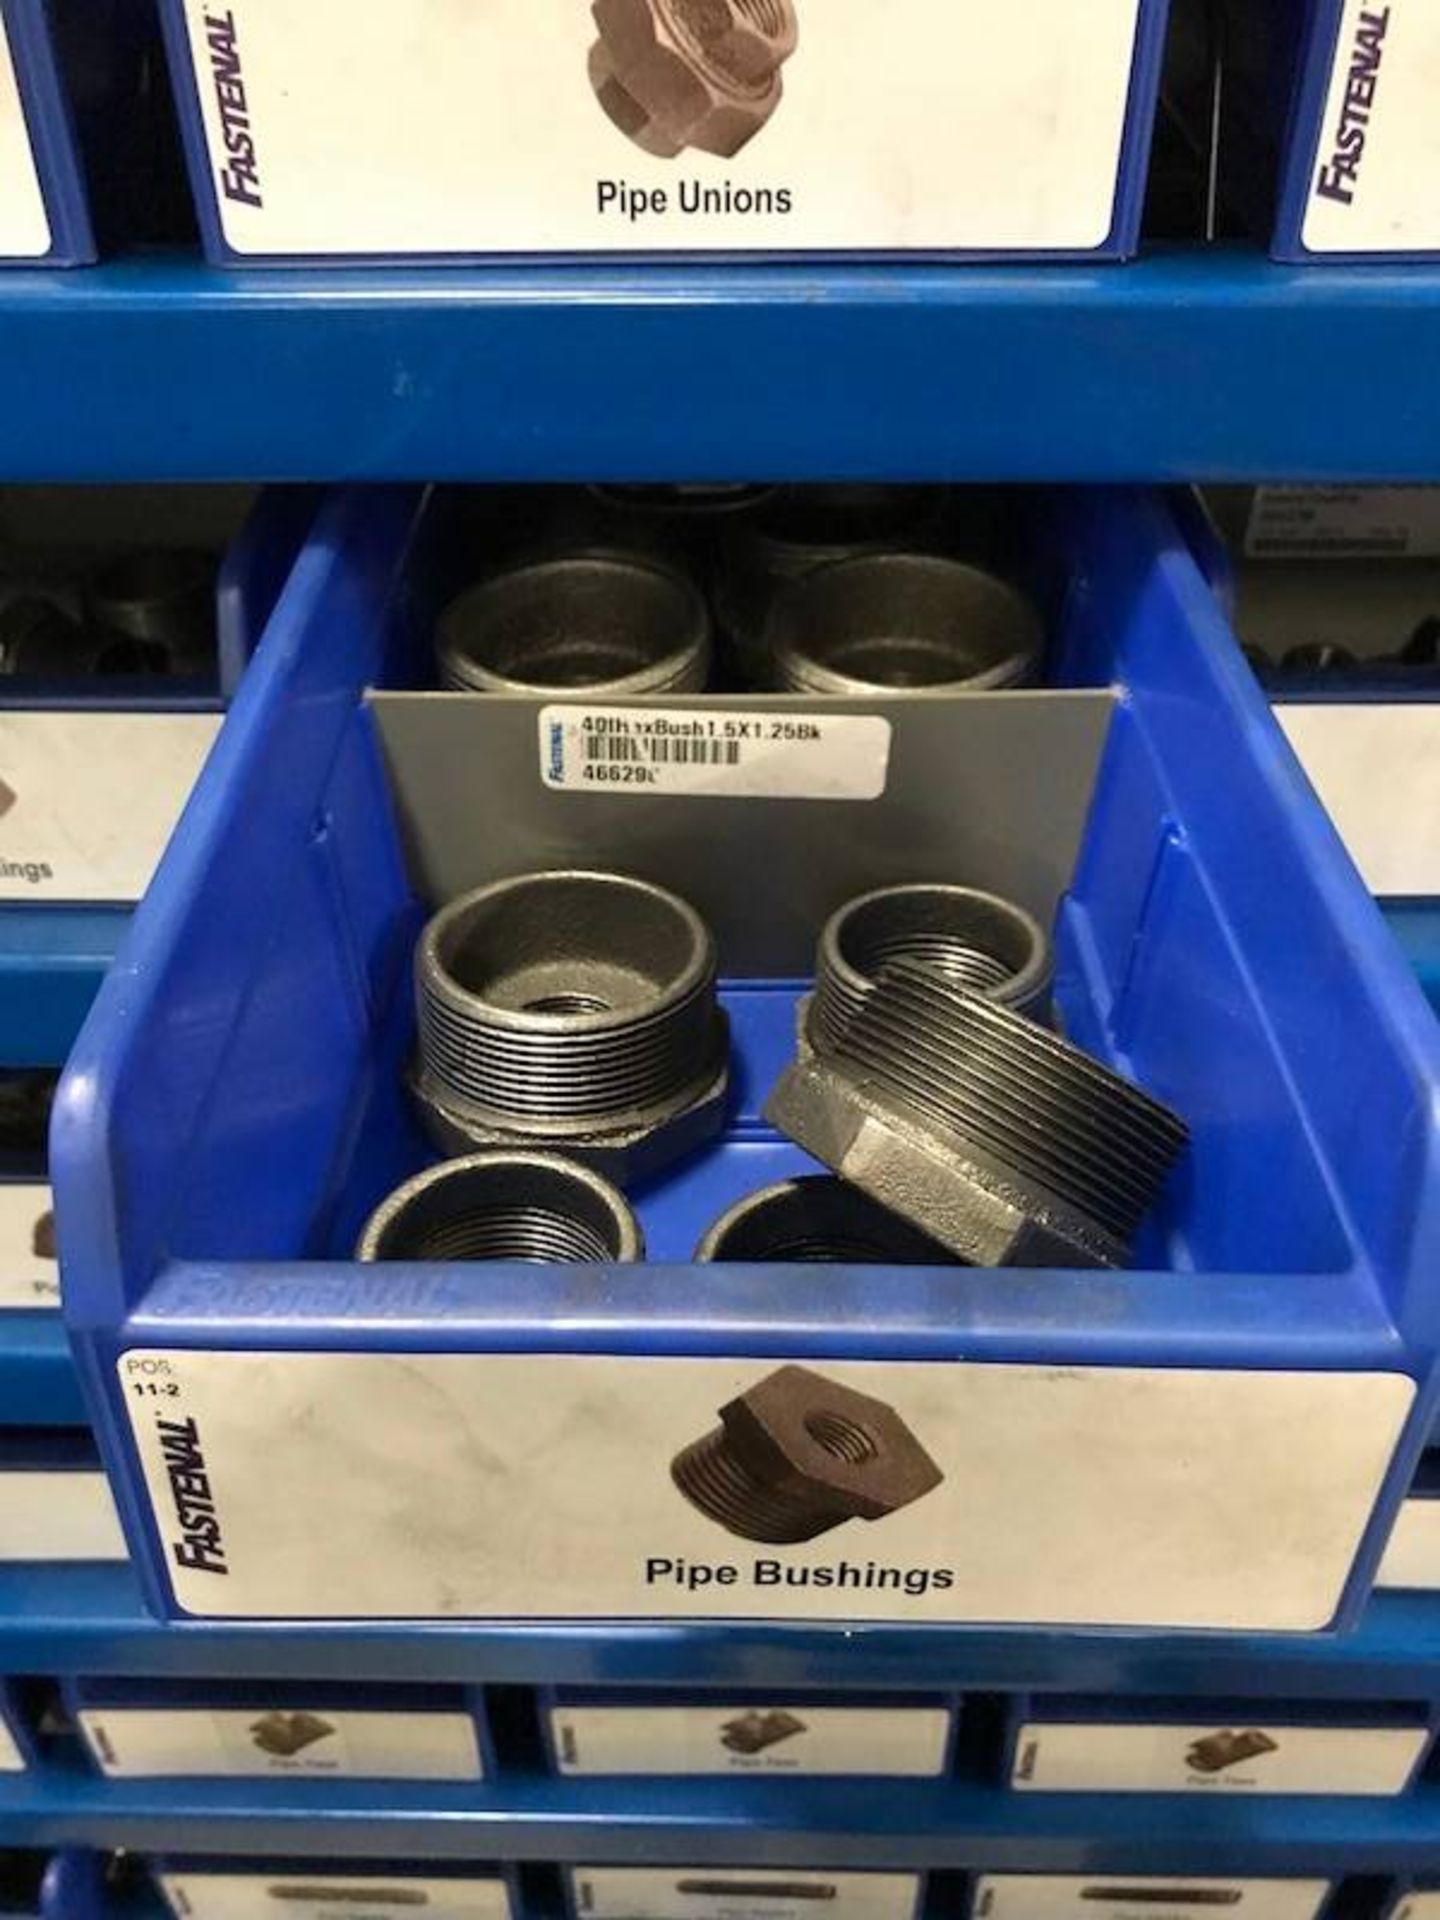 Contents of Fastenal Parts Bins - Image 58 of 70